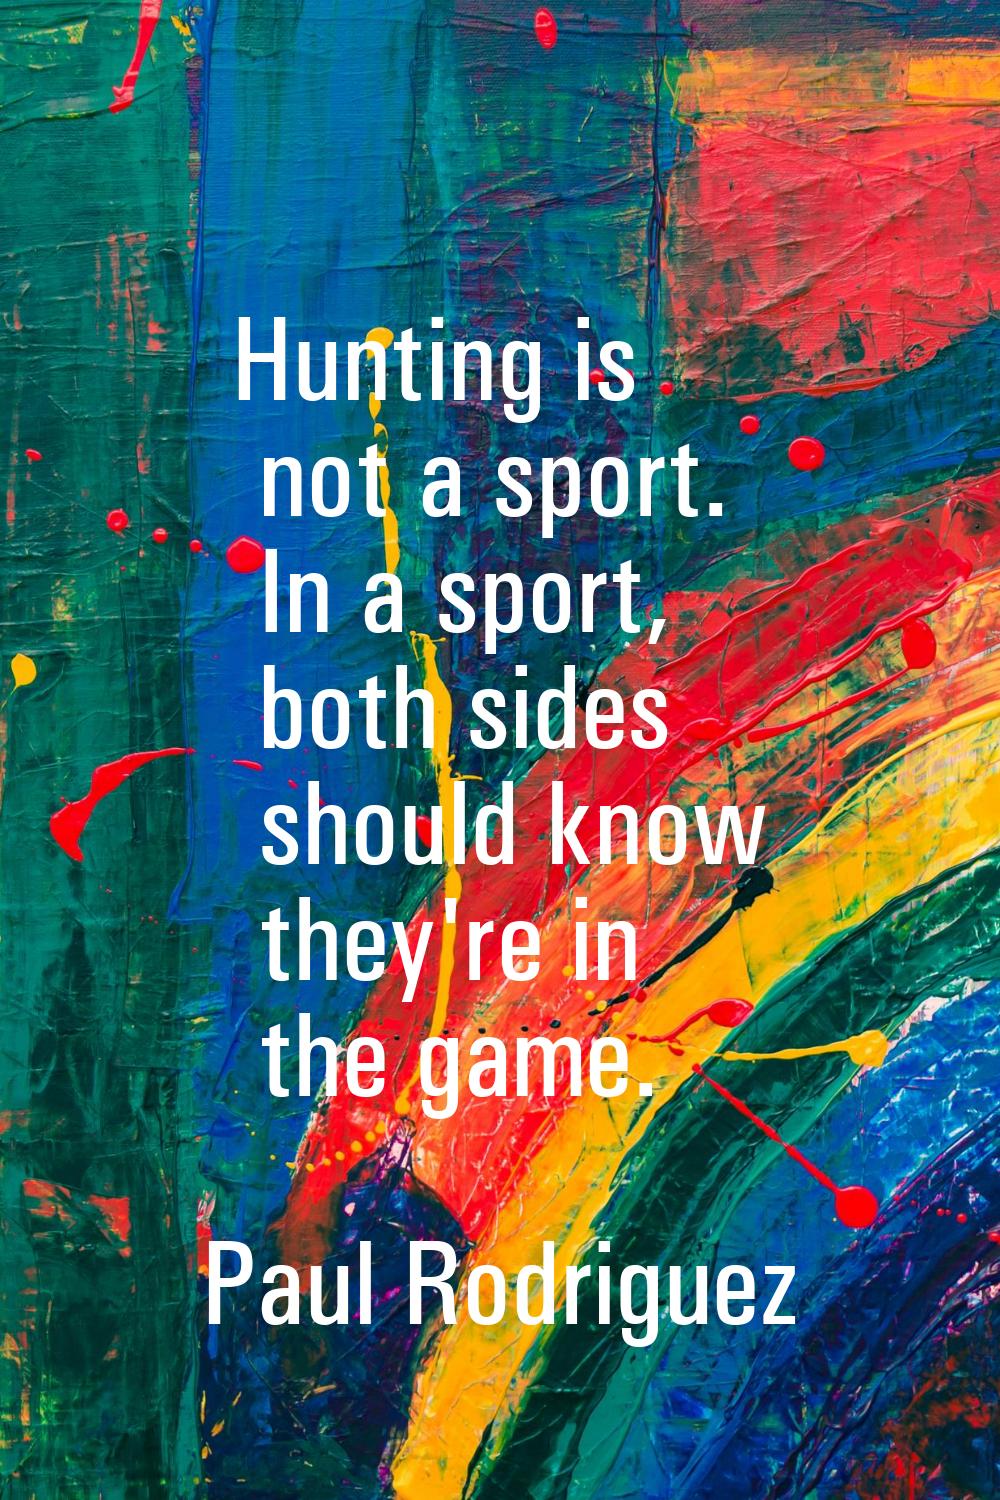 Hunting is not a sport. In a sport, both sides should know they're in the game.